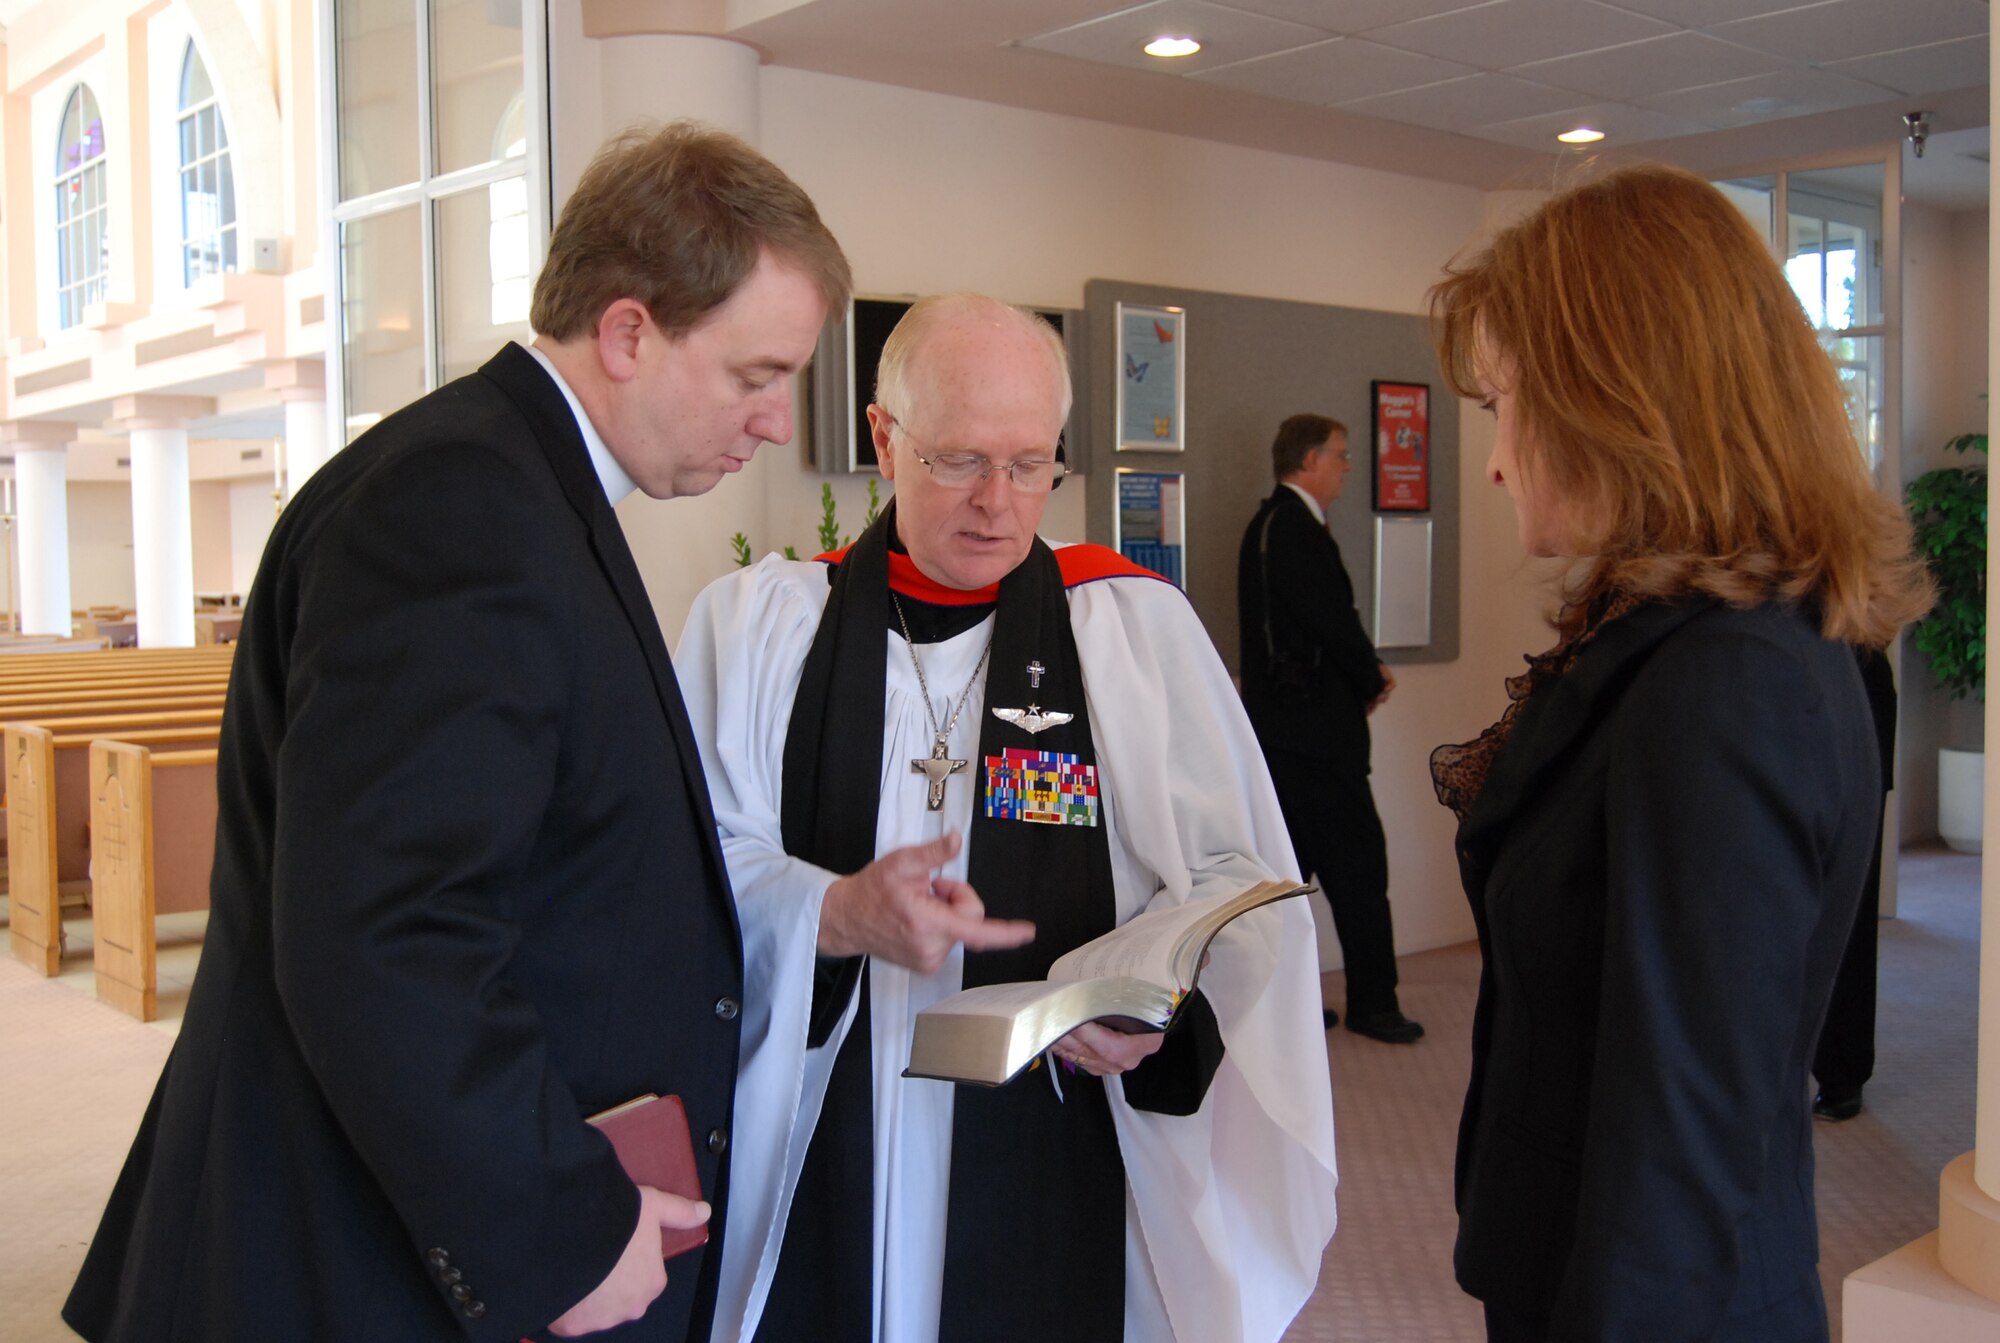 Reverend Dr. (US Air Force Ret. Col.) Robert G. Certain, St. Margaret's Episcopal Church and School rector in Palm Desert, California, reviews scripture with Father Brooks Keith, Beaver Creek, Colorado, as his wife Julie Keith looks on prior to the private family prayer service for former President Gerald R. Ford. Reverend Certain served as an Air Force Chaplain for the crew of Air Force One during the Ford administration as well as pastor to President and Mrs. Ford at St. Margaret's. 
'It's been a blessing to be associated with his family and this parish," said Reverend Certain. More than 500 military members are in Palm Desert supporting the California portion of the State Funeral for the former president. The military is providing ceremonial, logistics, and security support to honor and pay tribute to the former Commander-in-Chief and the Ford family. Ford died in Palm Desert, California, Dec. 26 at the age of 93. (U.S. Air Force Photo/1st Lt Carrie L. Kessler)